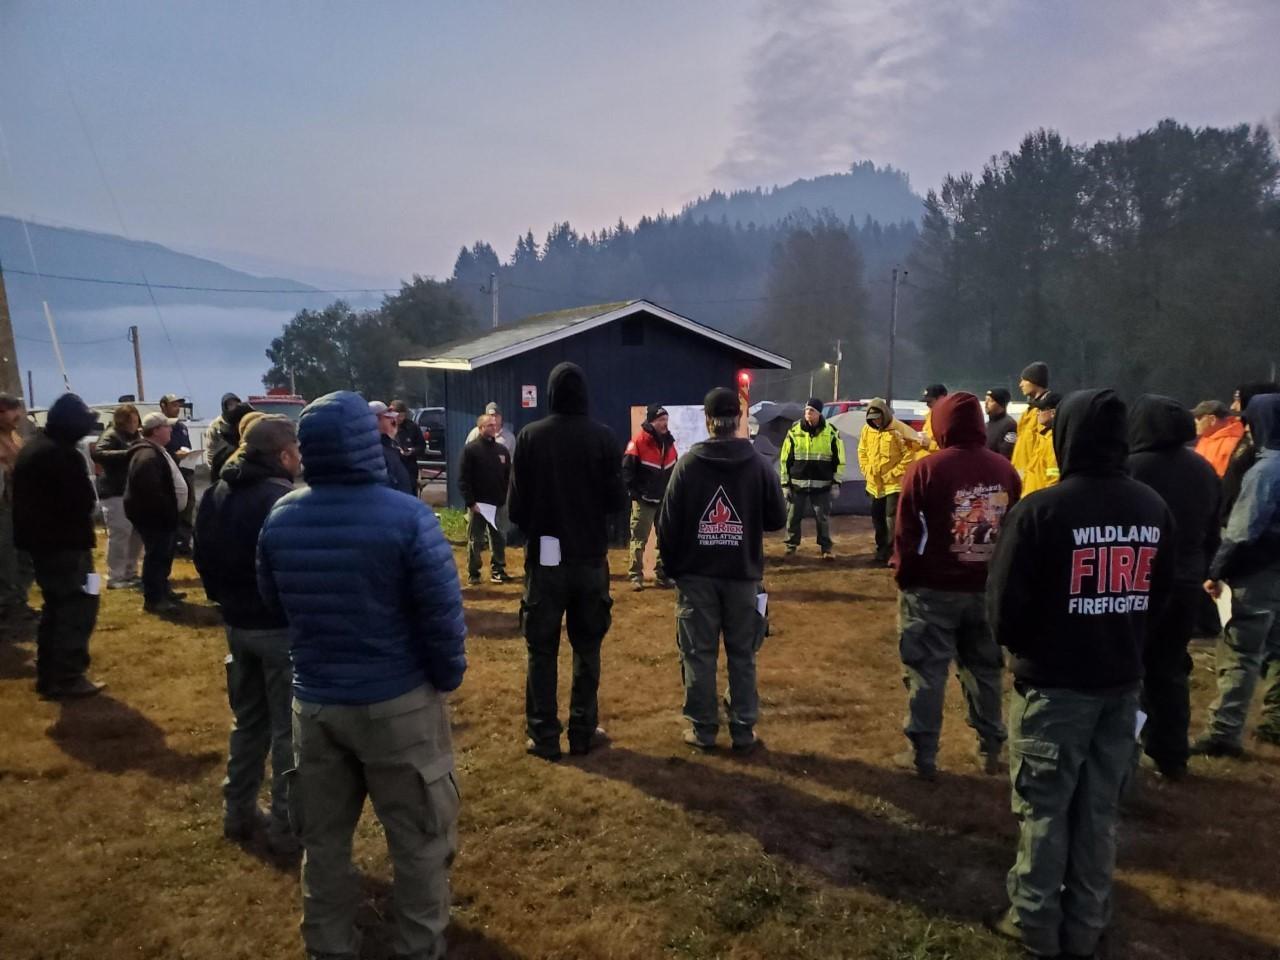 Incident commander briefs fire crews at the beginning of their shifts. Sun is just rising and mist/smoke is visible over the background which includes a small lake, tents and forested hills.